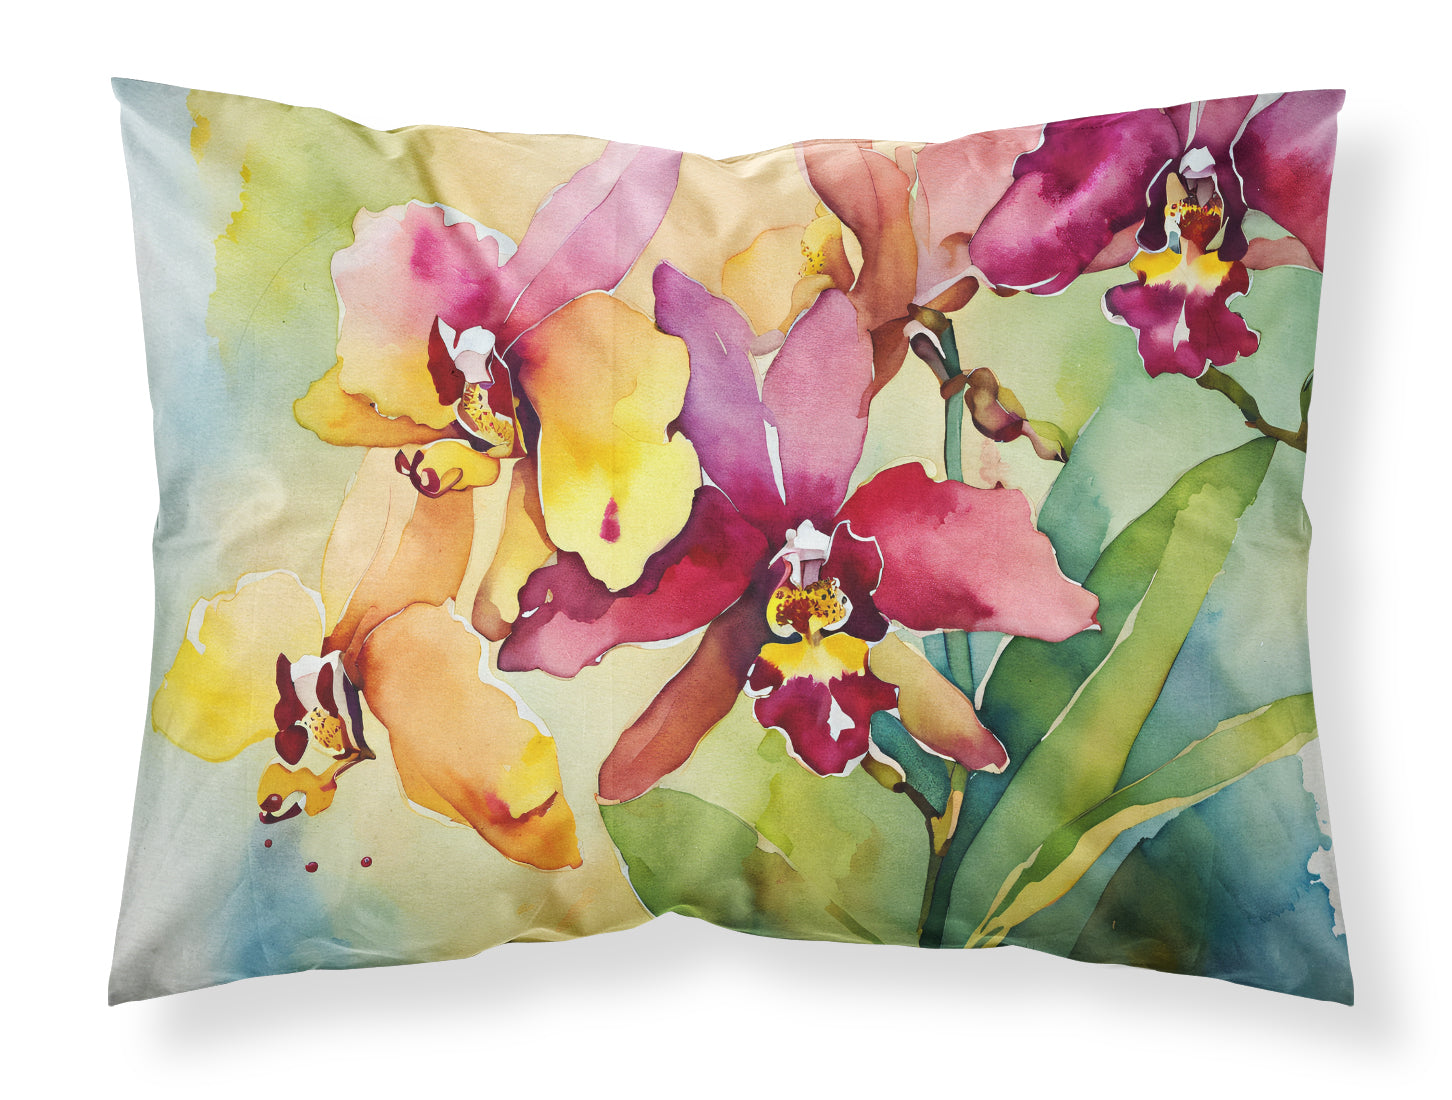 Buy this Orchids in Watercolor Fabric Standard Pillowcase